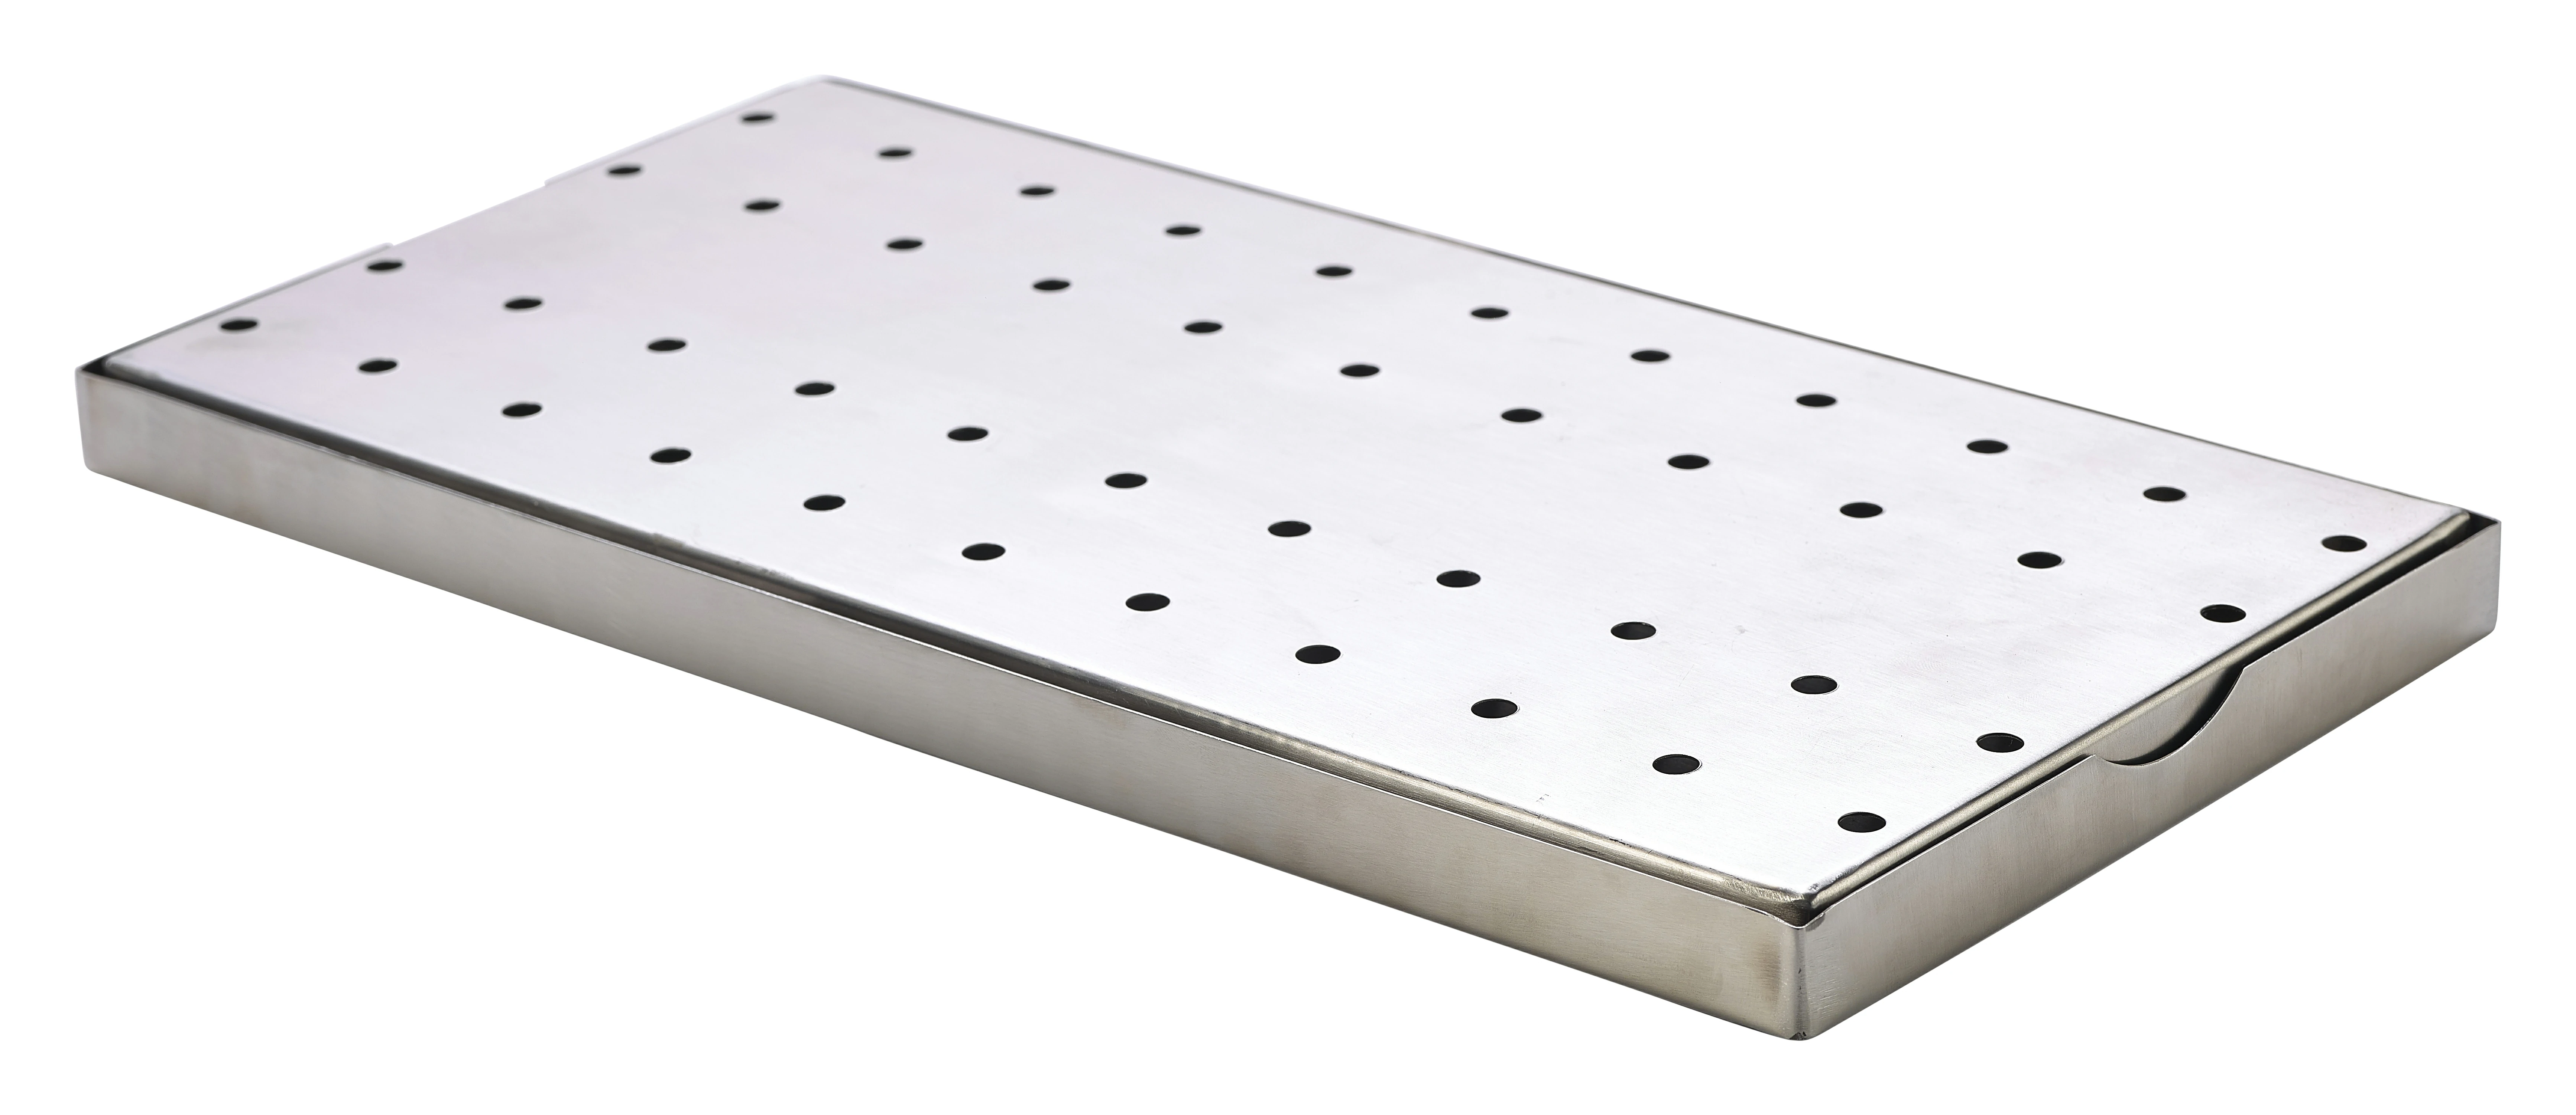 Stainless Steel Drip Tray 30x20cm